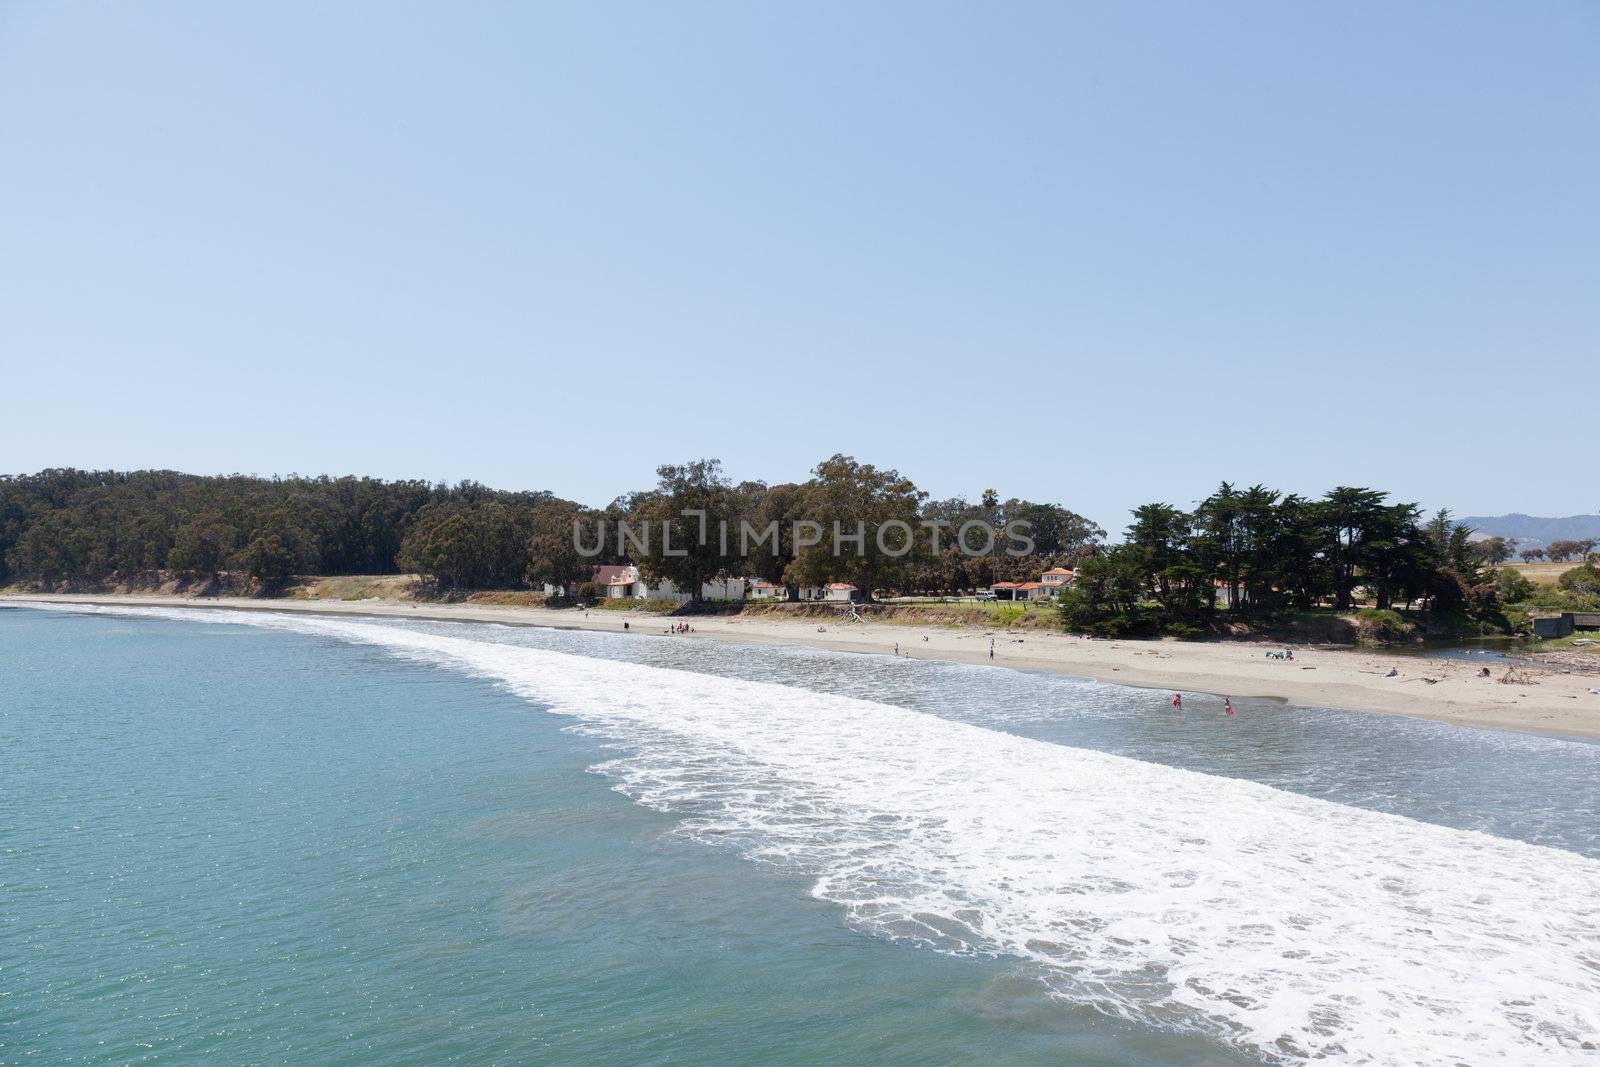 San Simeon State Park is one of the oldest units of the California State Park System. The coastal bluffs and promontories of the scenic park offer unobstructed views of the ocean and rocky shore.